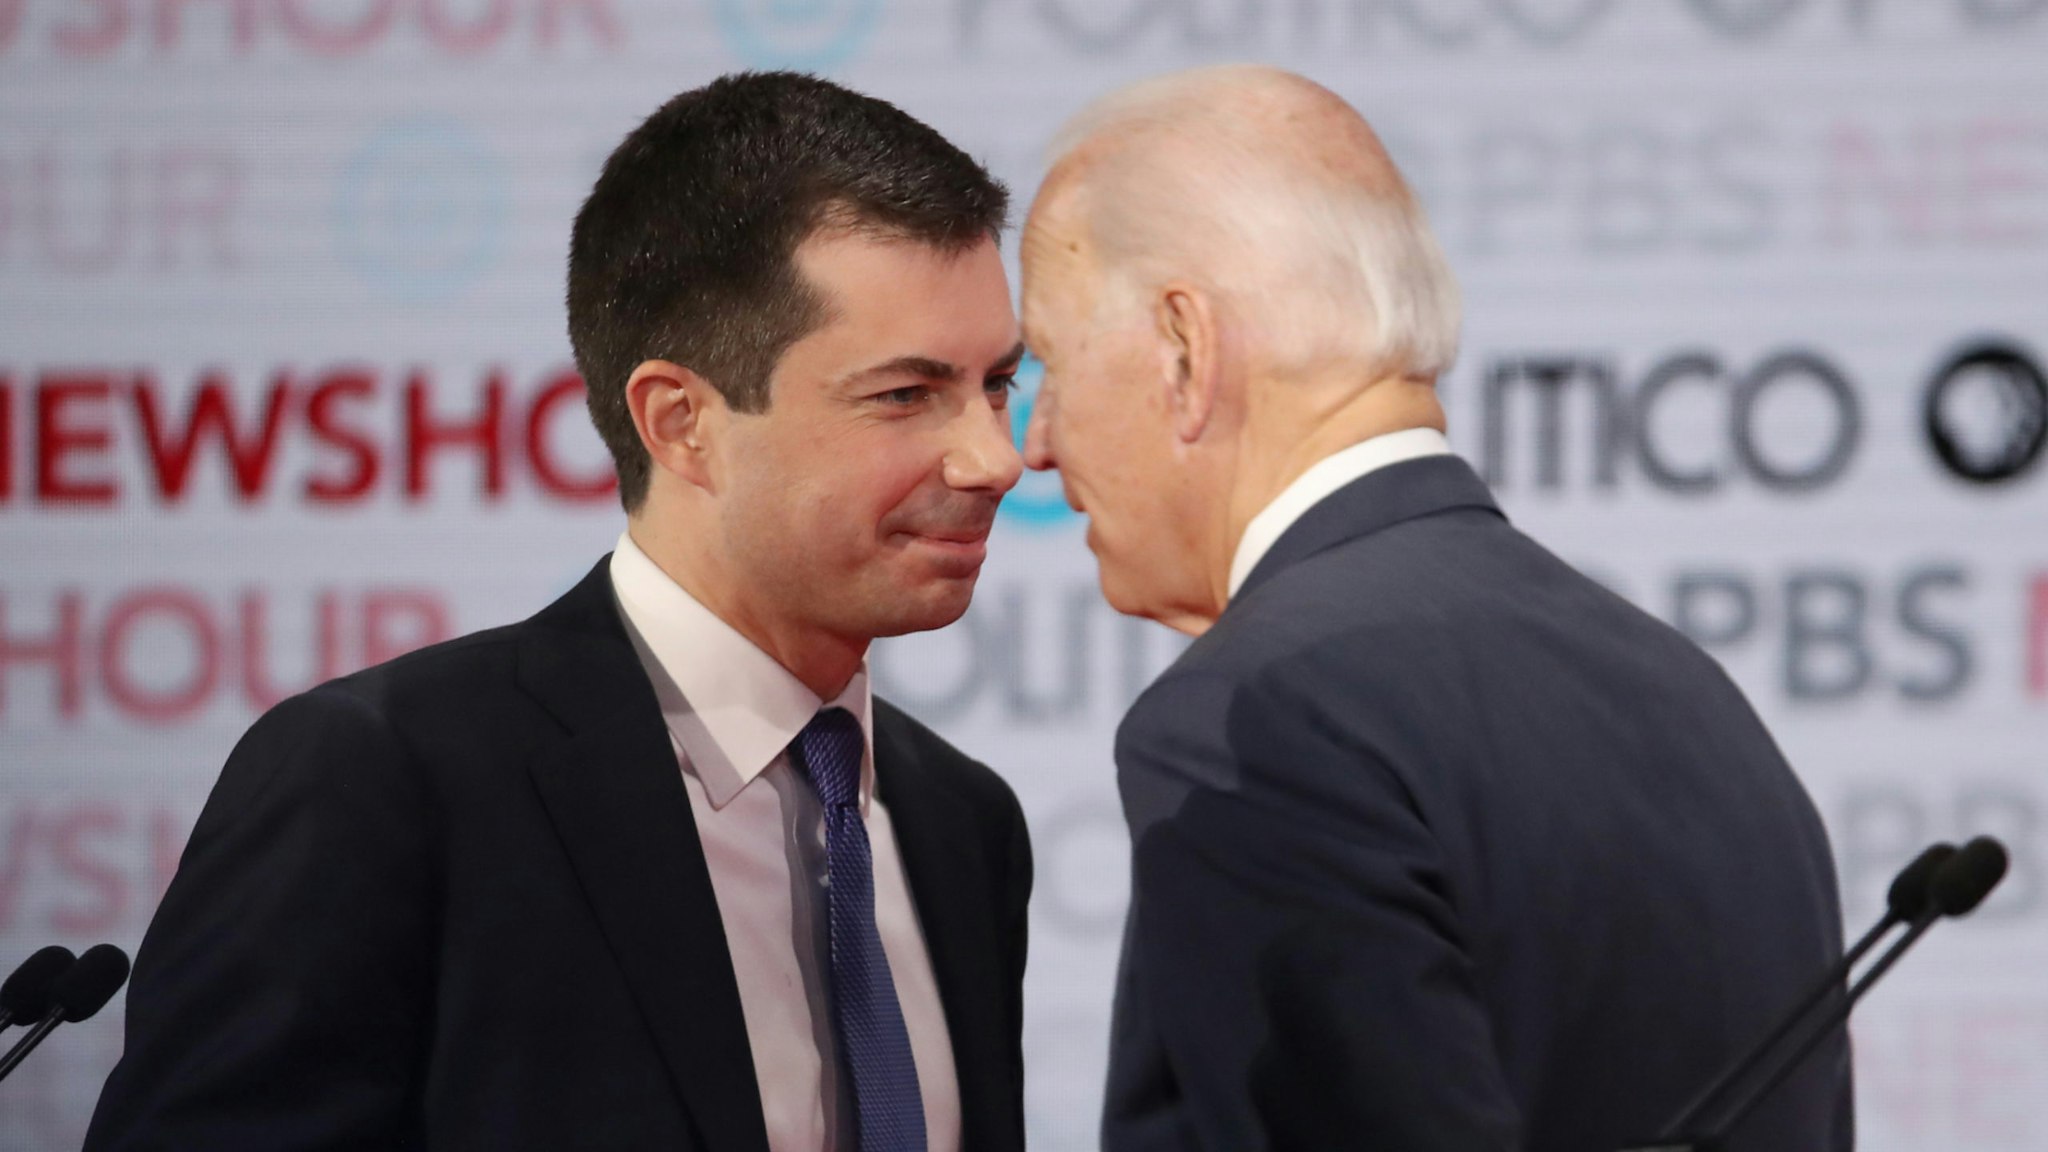 Democratic presidential candidate South Bend, Indiana Mayor Pete Buttigieg (L) speaks with former Vice President Joe Biden during the Democratic presidential primary debate at Loyola Marymount University on December 19, 2019 in Los Angeles, California.